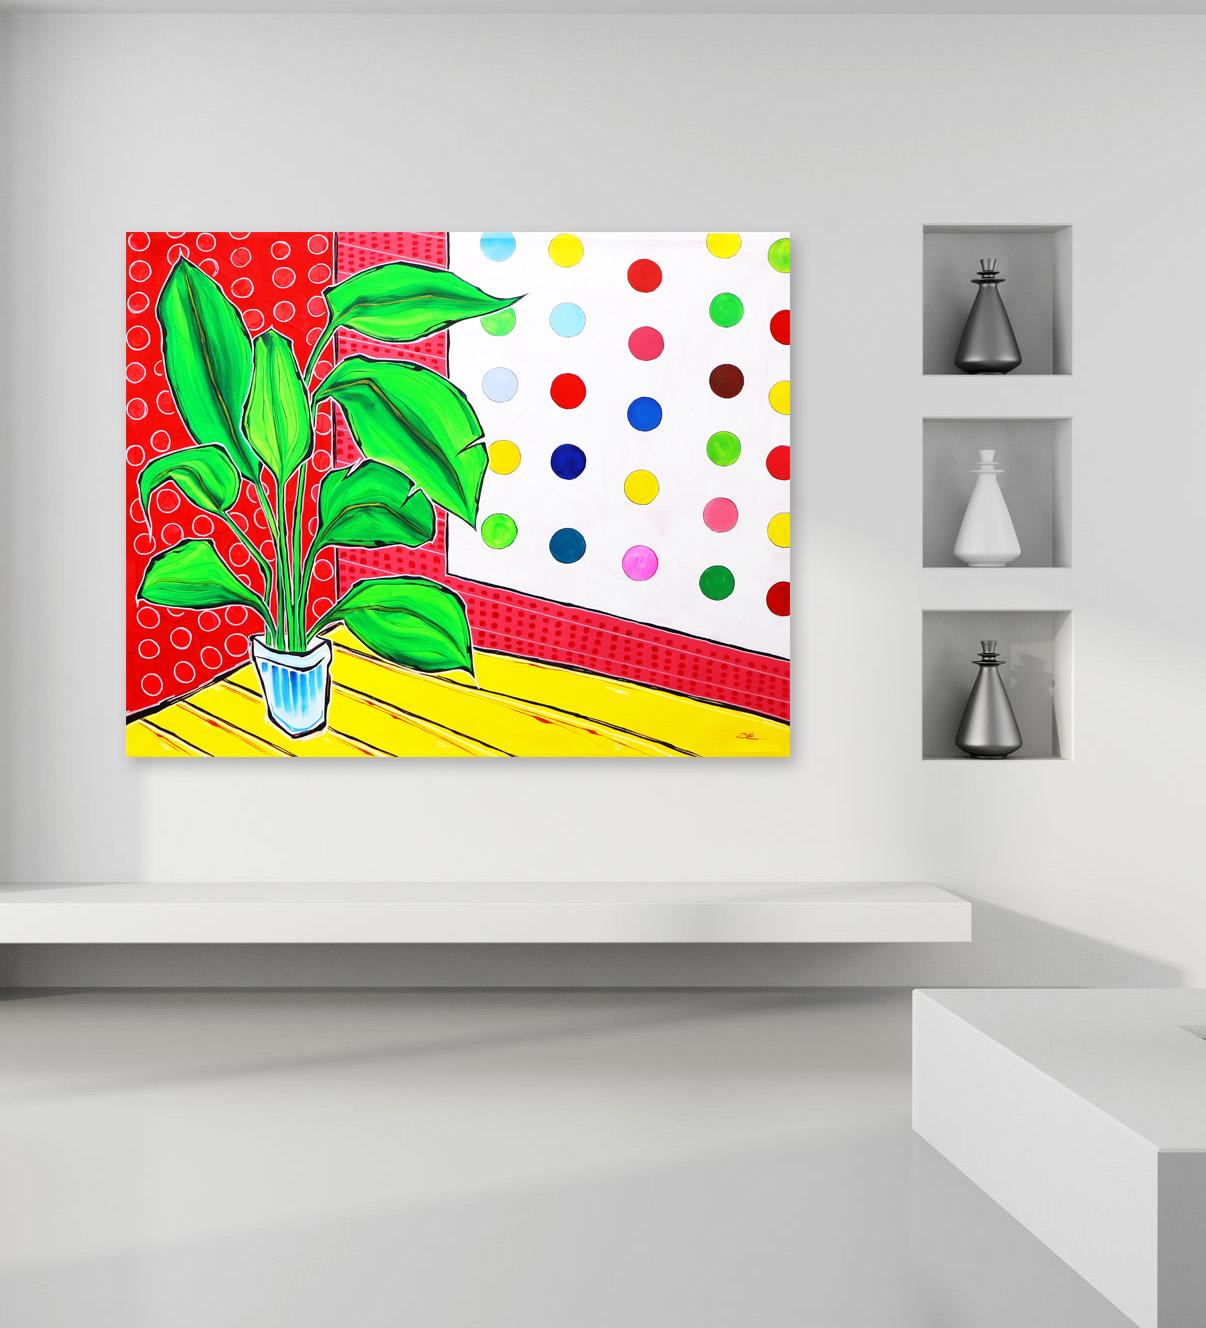 English artist Jonjo Elliot's large scale still life works are a collision of expressionistic fauvism and his collections encourage a youthful candor. Plants thrive in environments the viewer wants to immerse themselves in. He’s interested in the